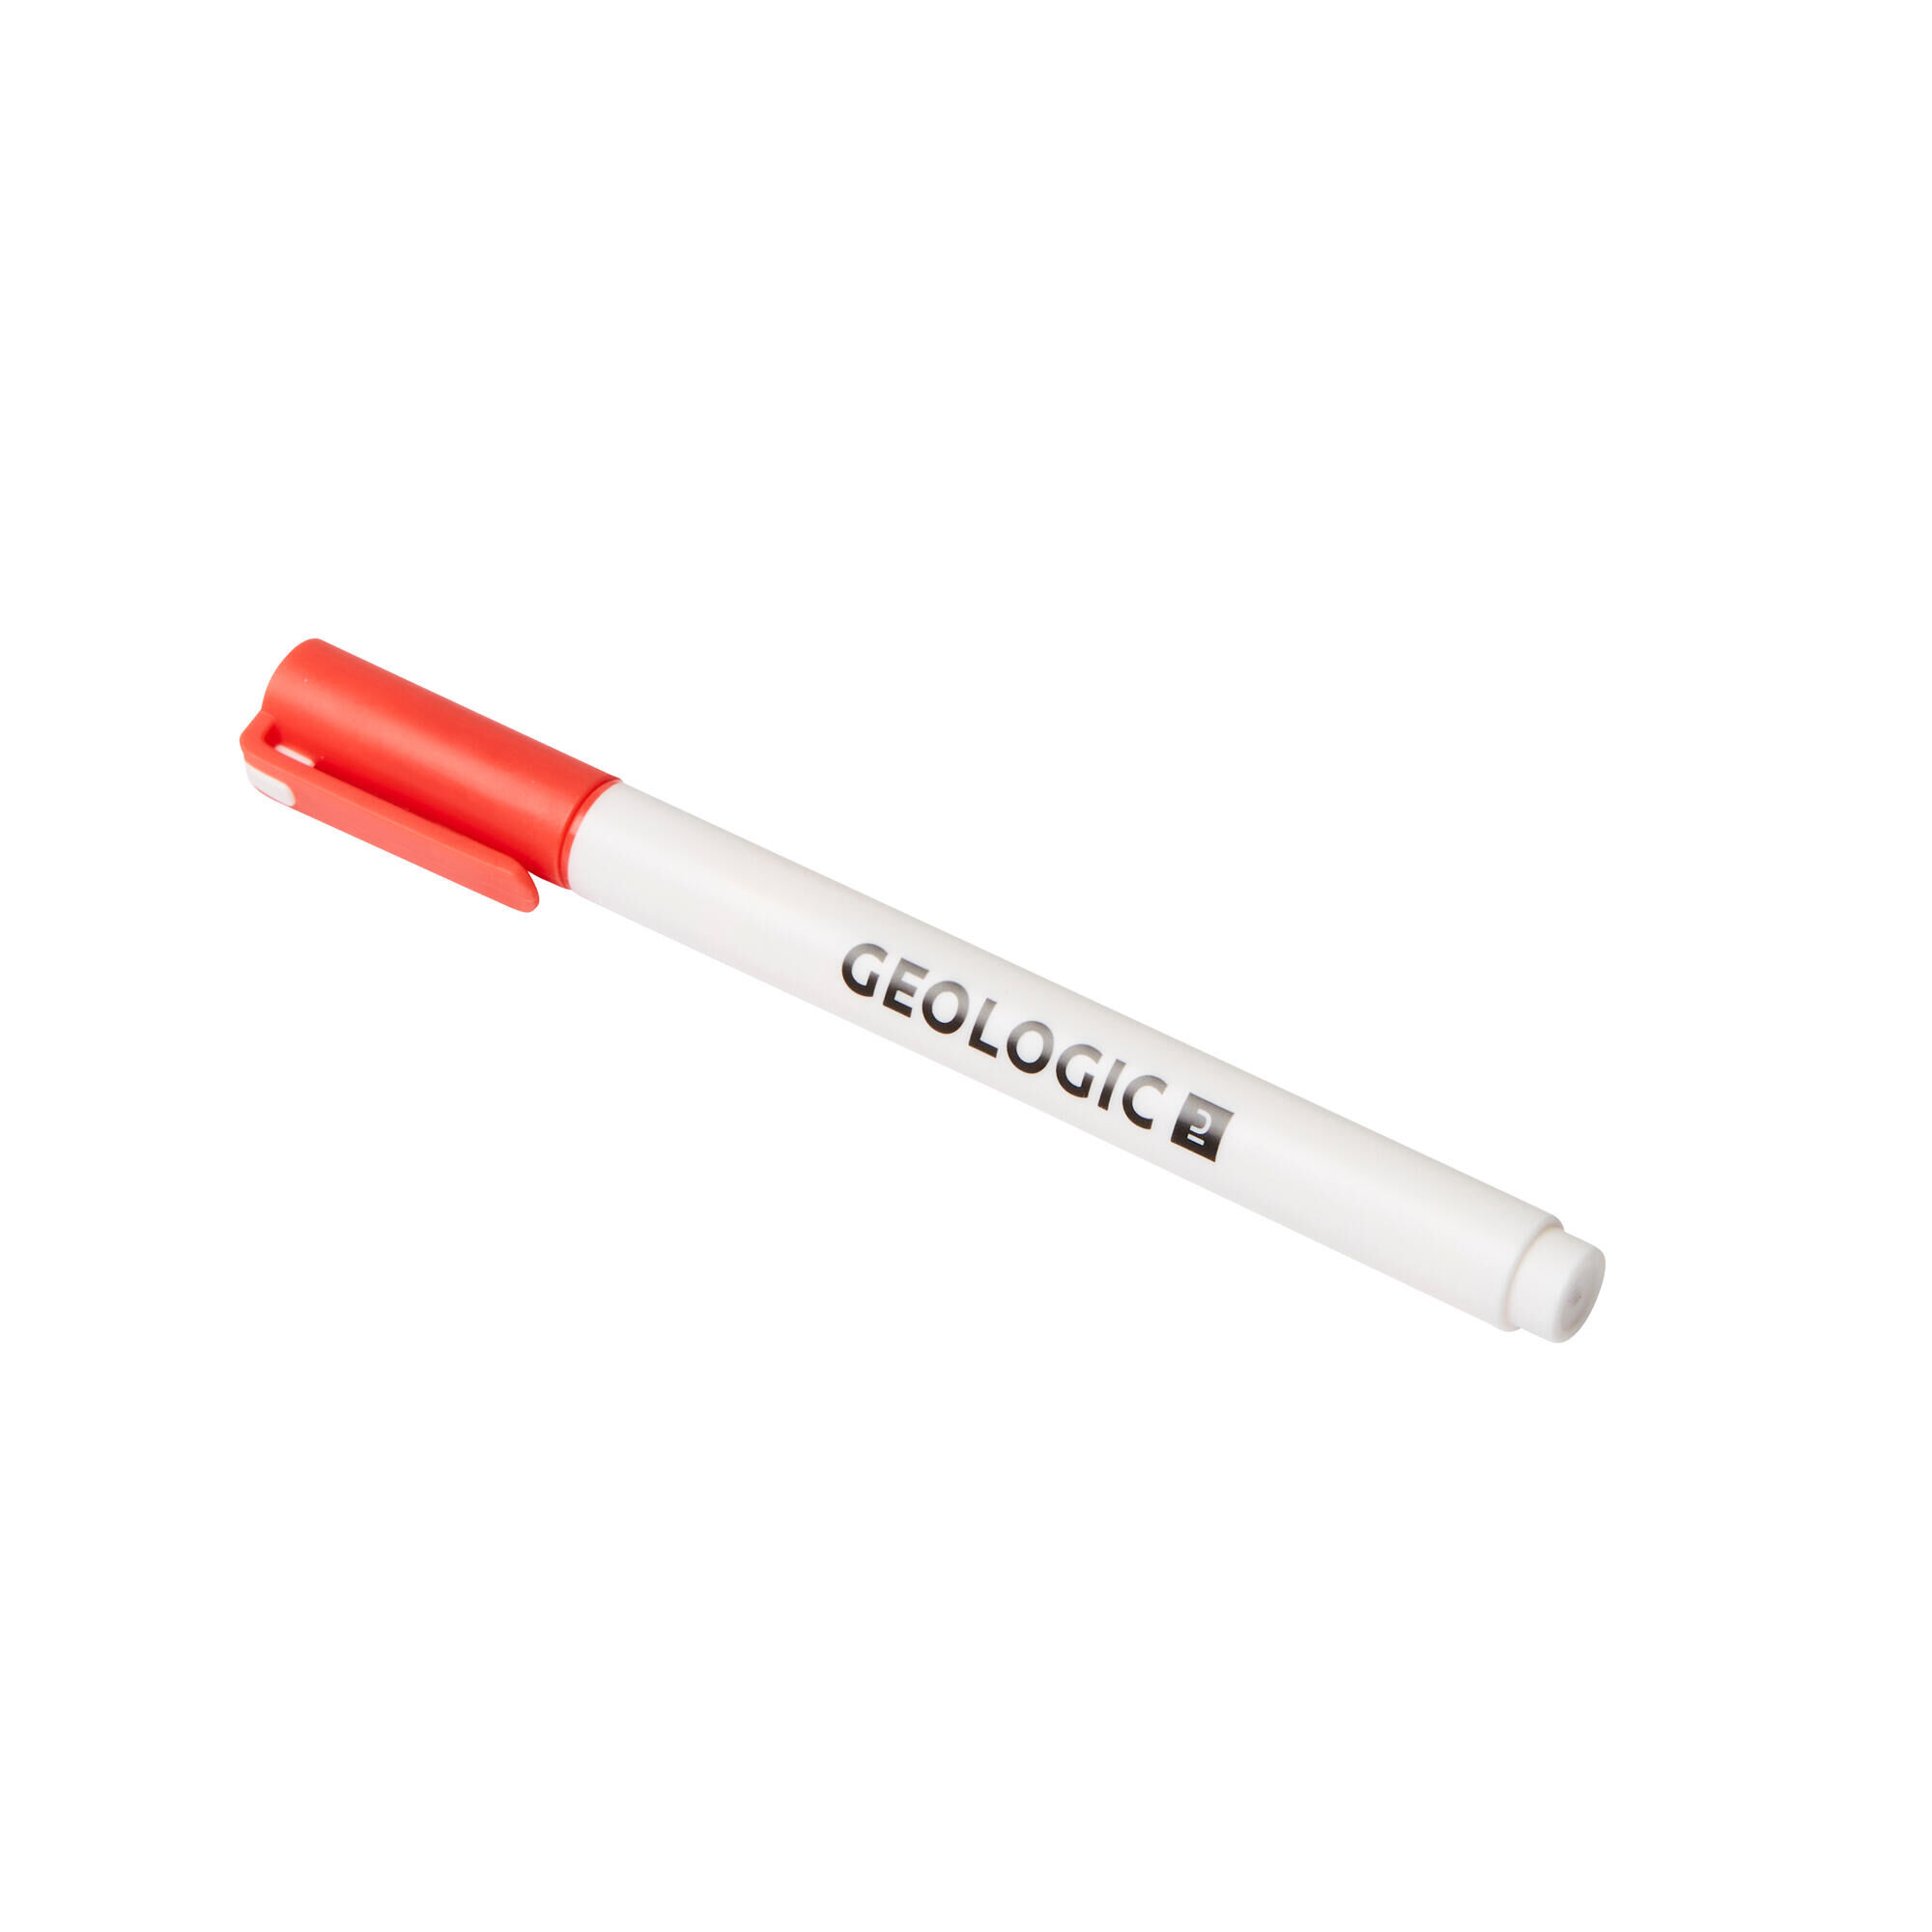 GEOLOGIC Paint Marker for Personalized Petanque Boules - Coral